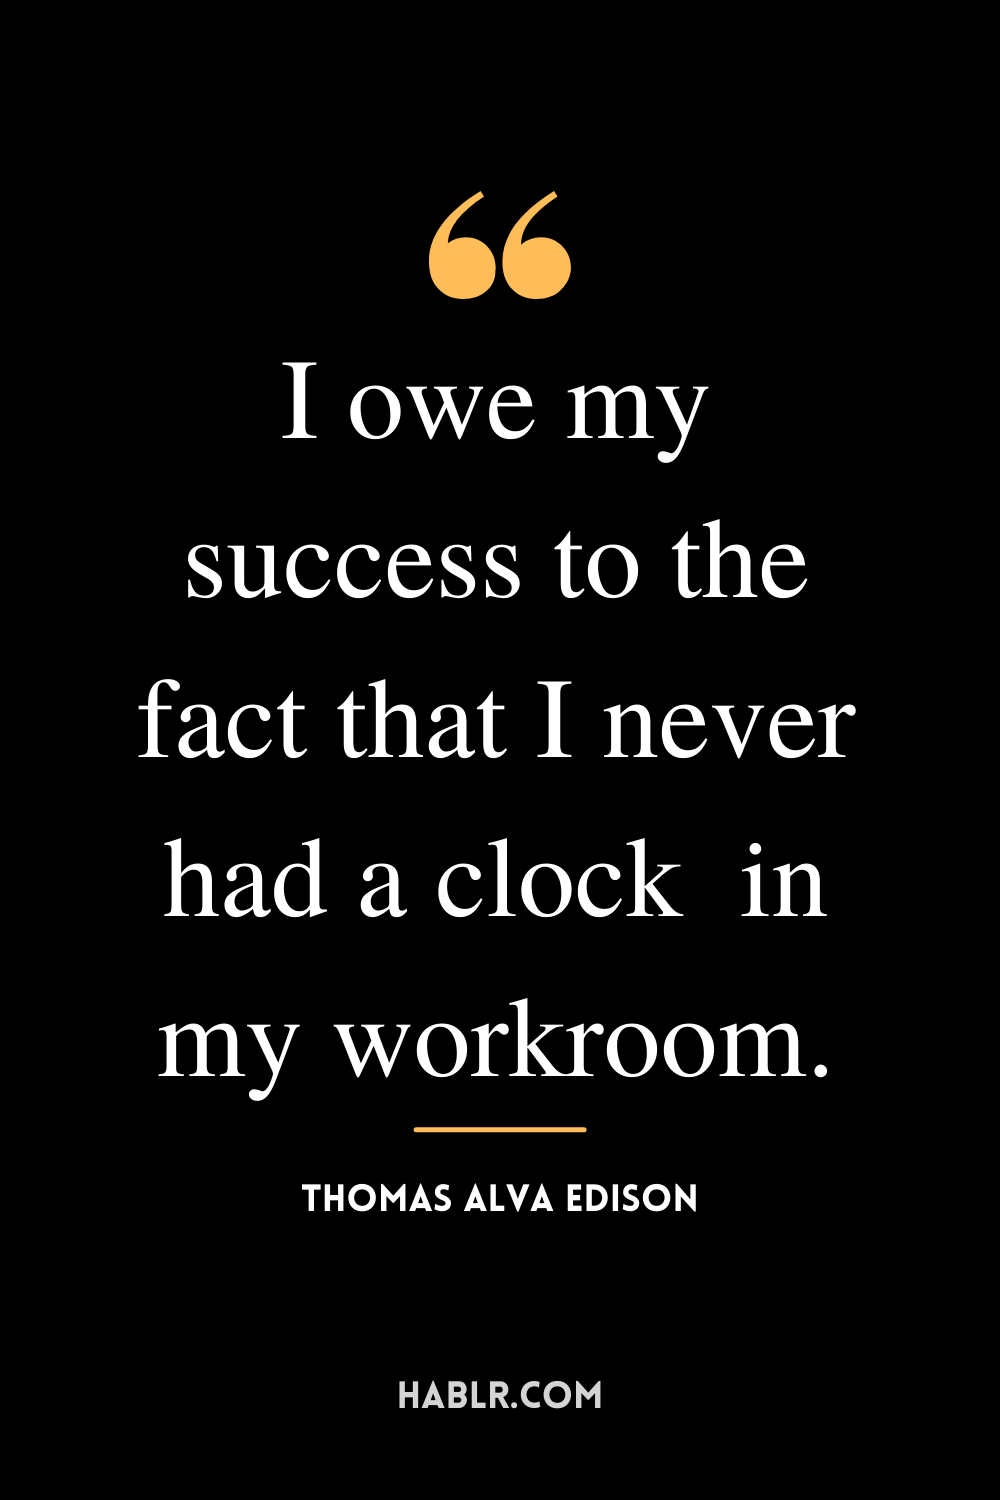 “I owe my success to the fact that I never had a clock  in my workroom.” -Thomas Alva Edison